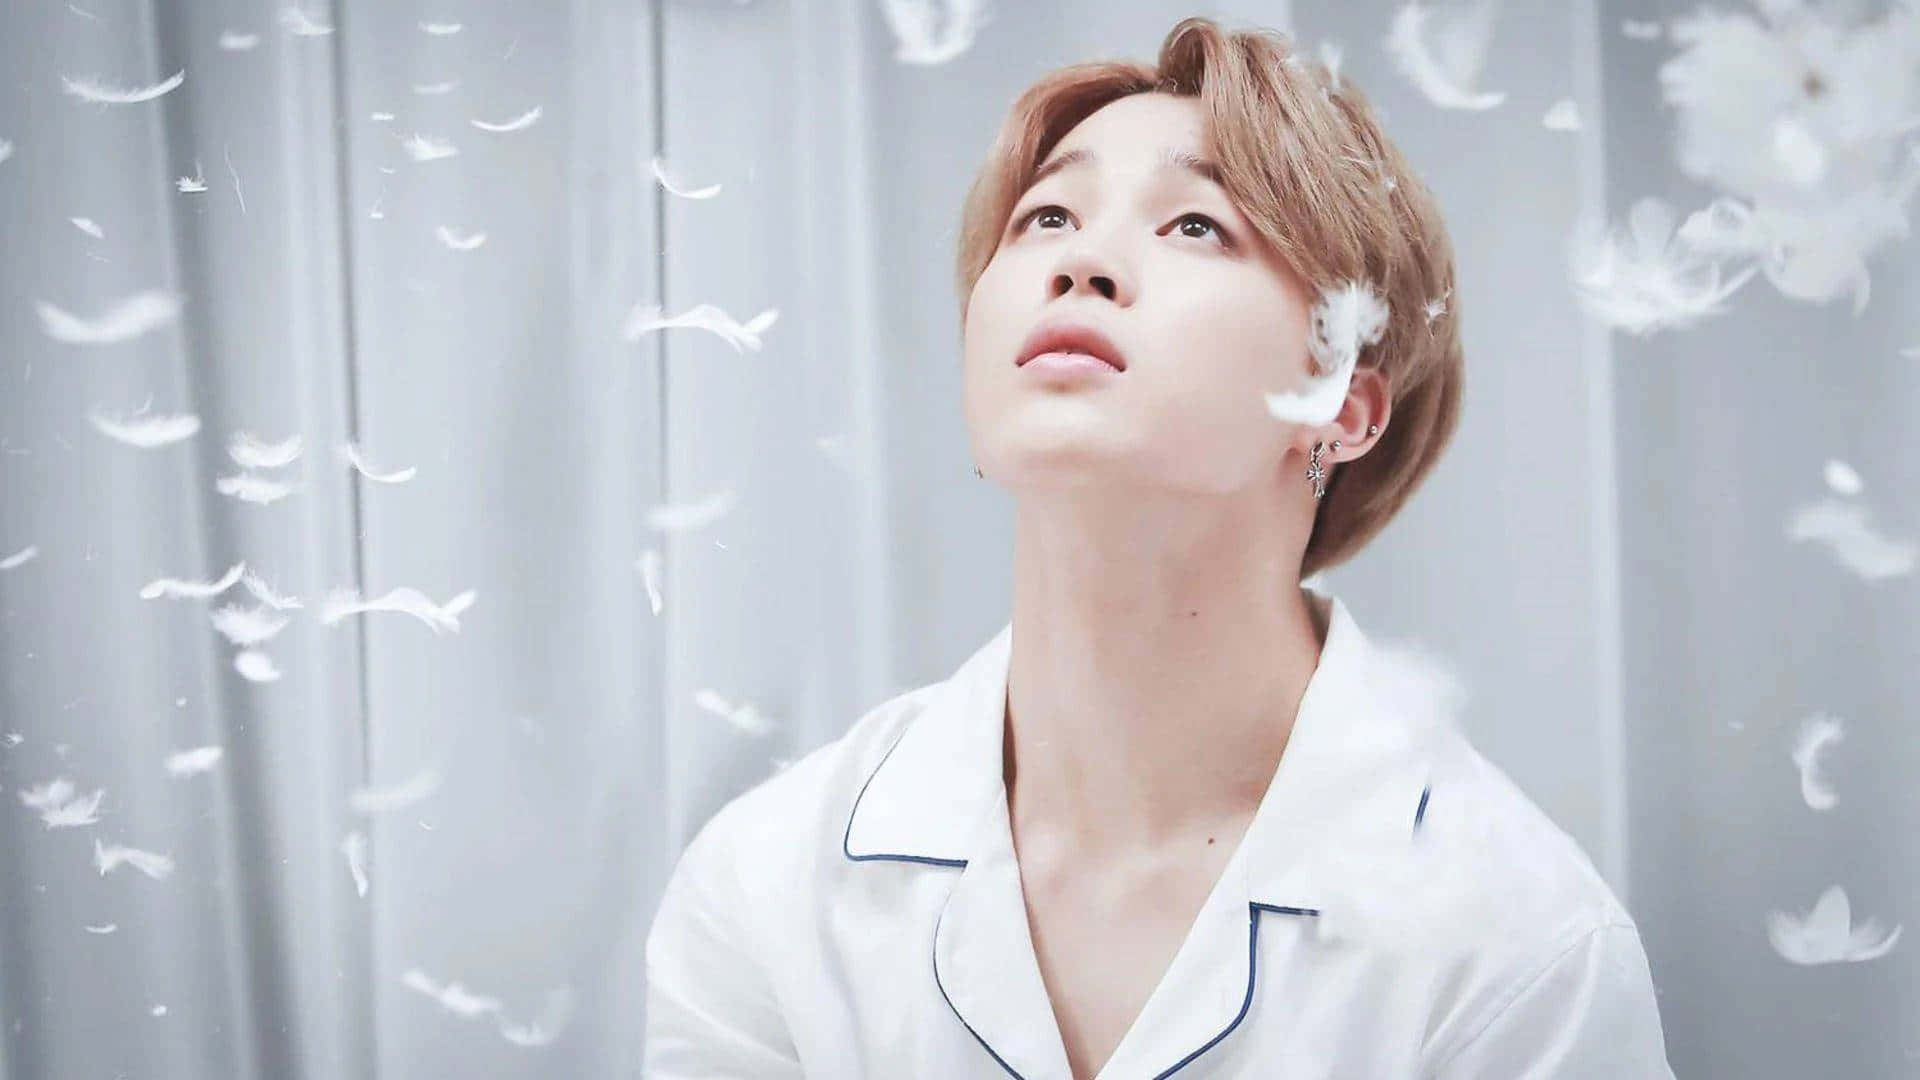 Captivating Charm: BTS Jimin in a Mesmerizing Pose